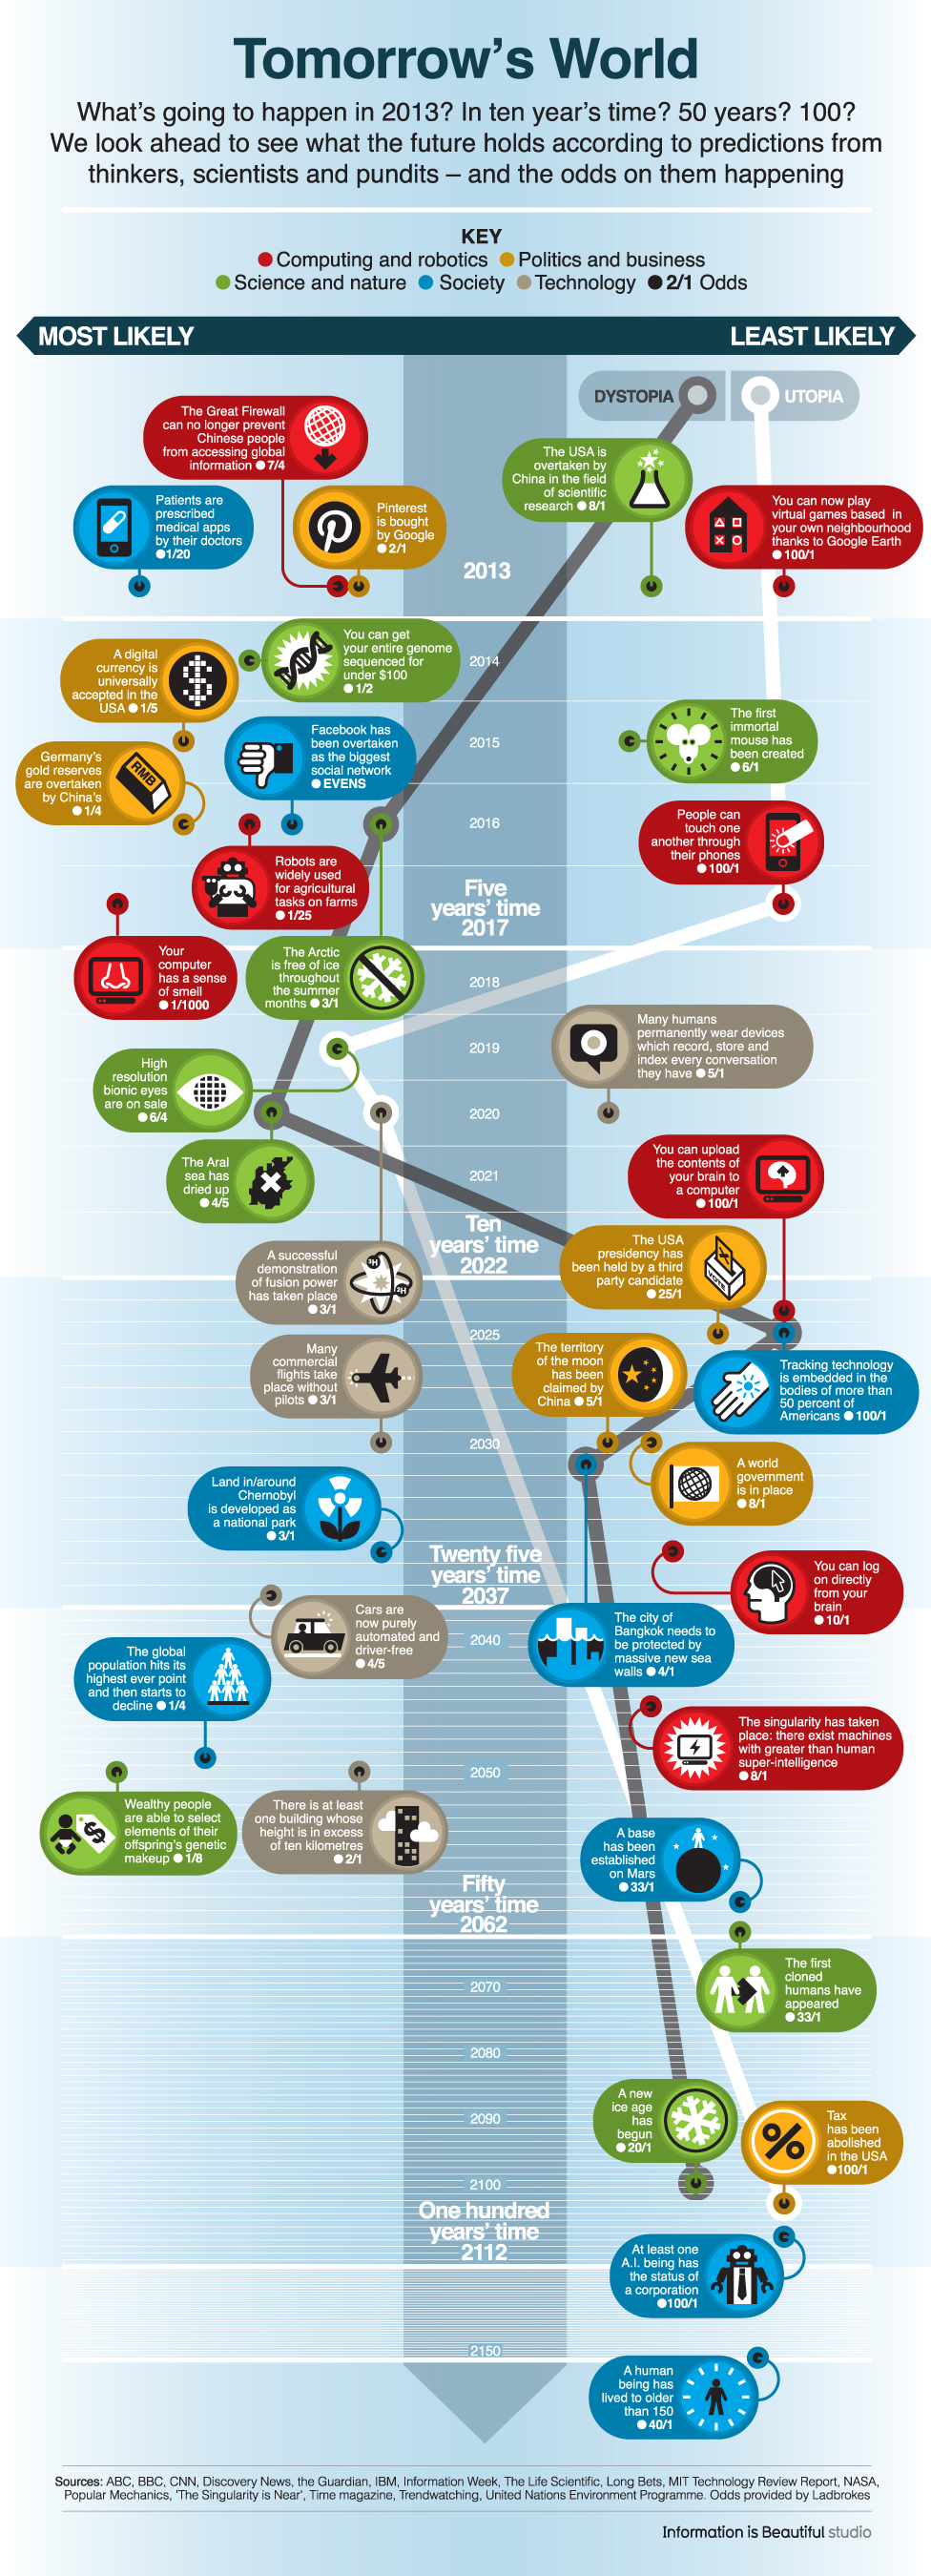 technology-next-150-years-infographic (1)